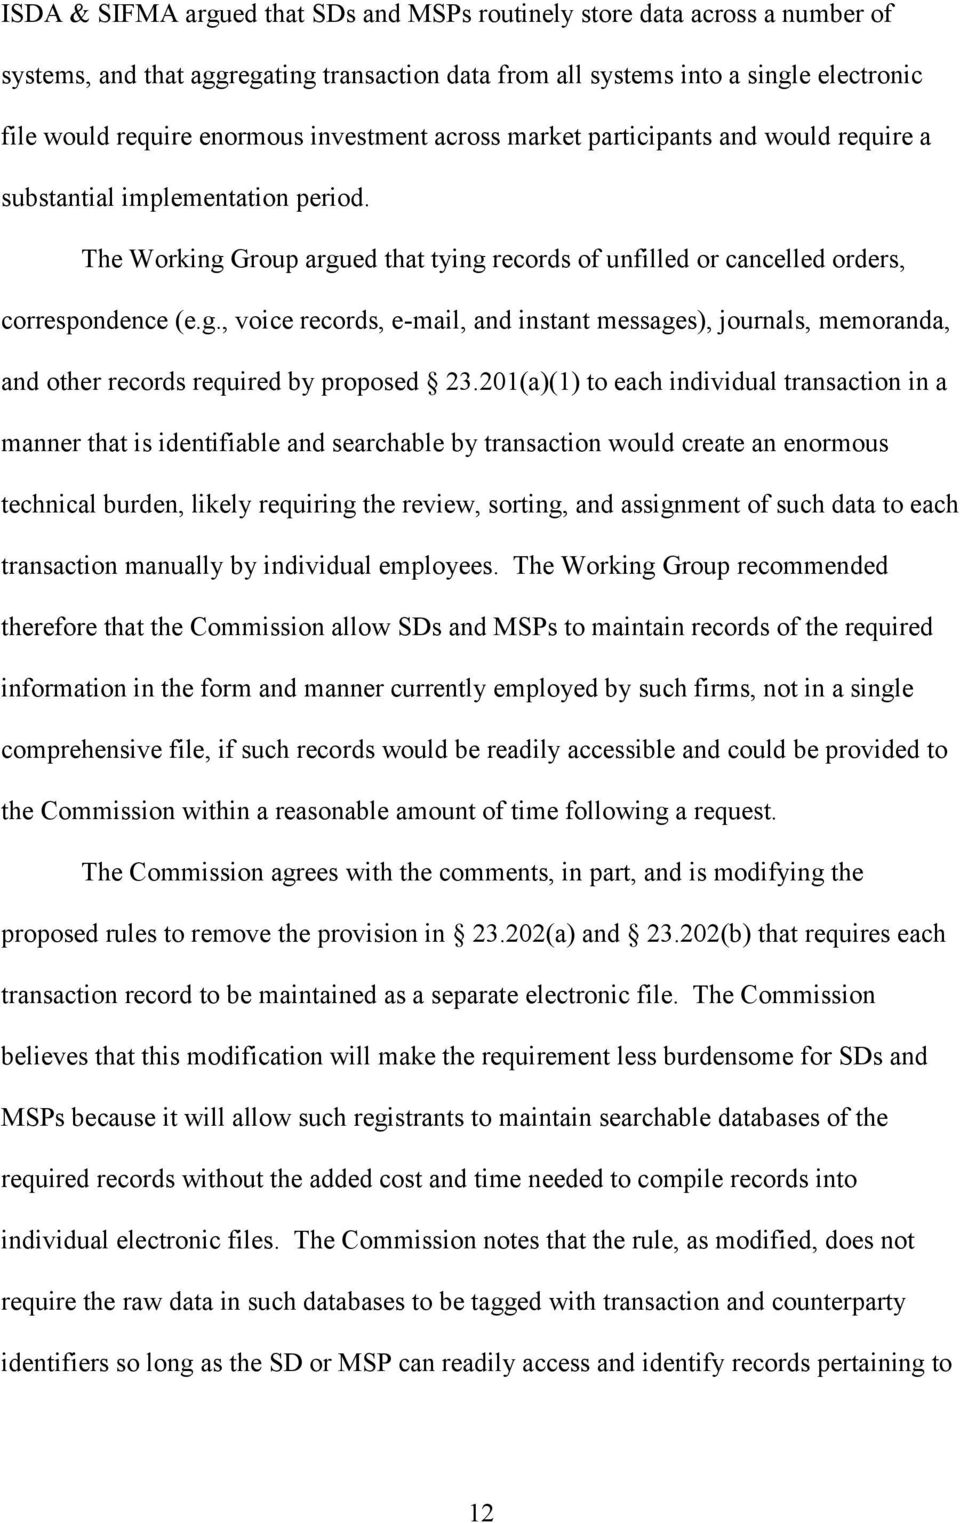 Group argued that tying records of unfilled or cancelled orders, correspondence (e.g., voice records, e-mail, and instant messages), journals, memoranda, and other records required by proposed 23.